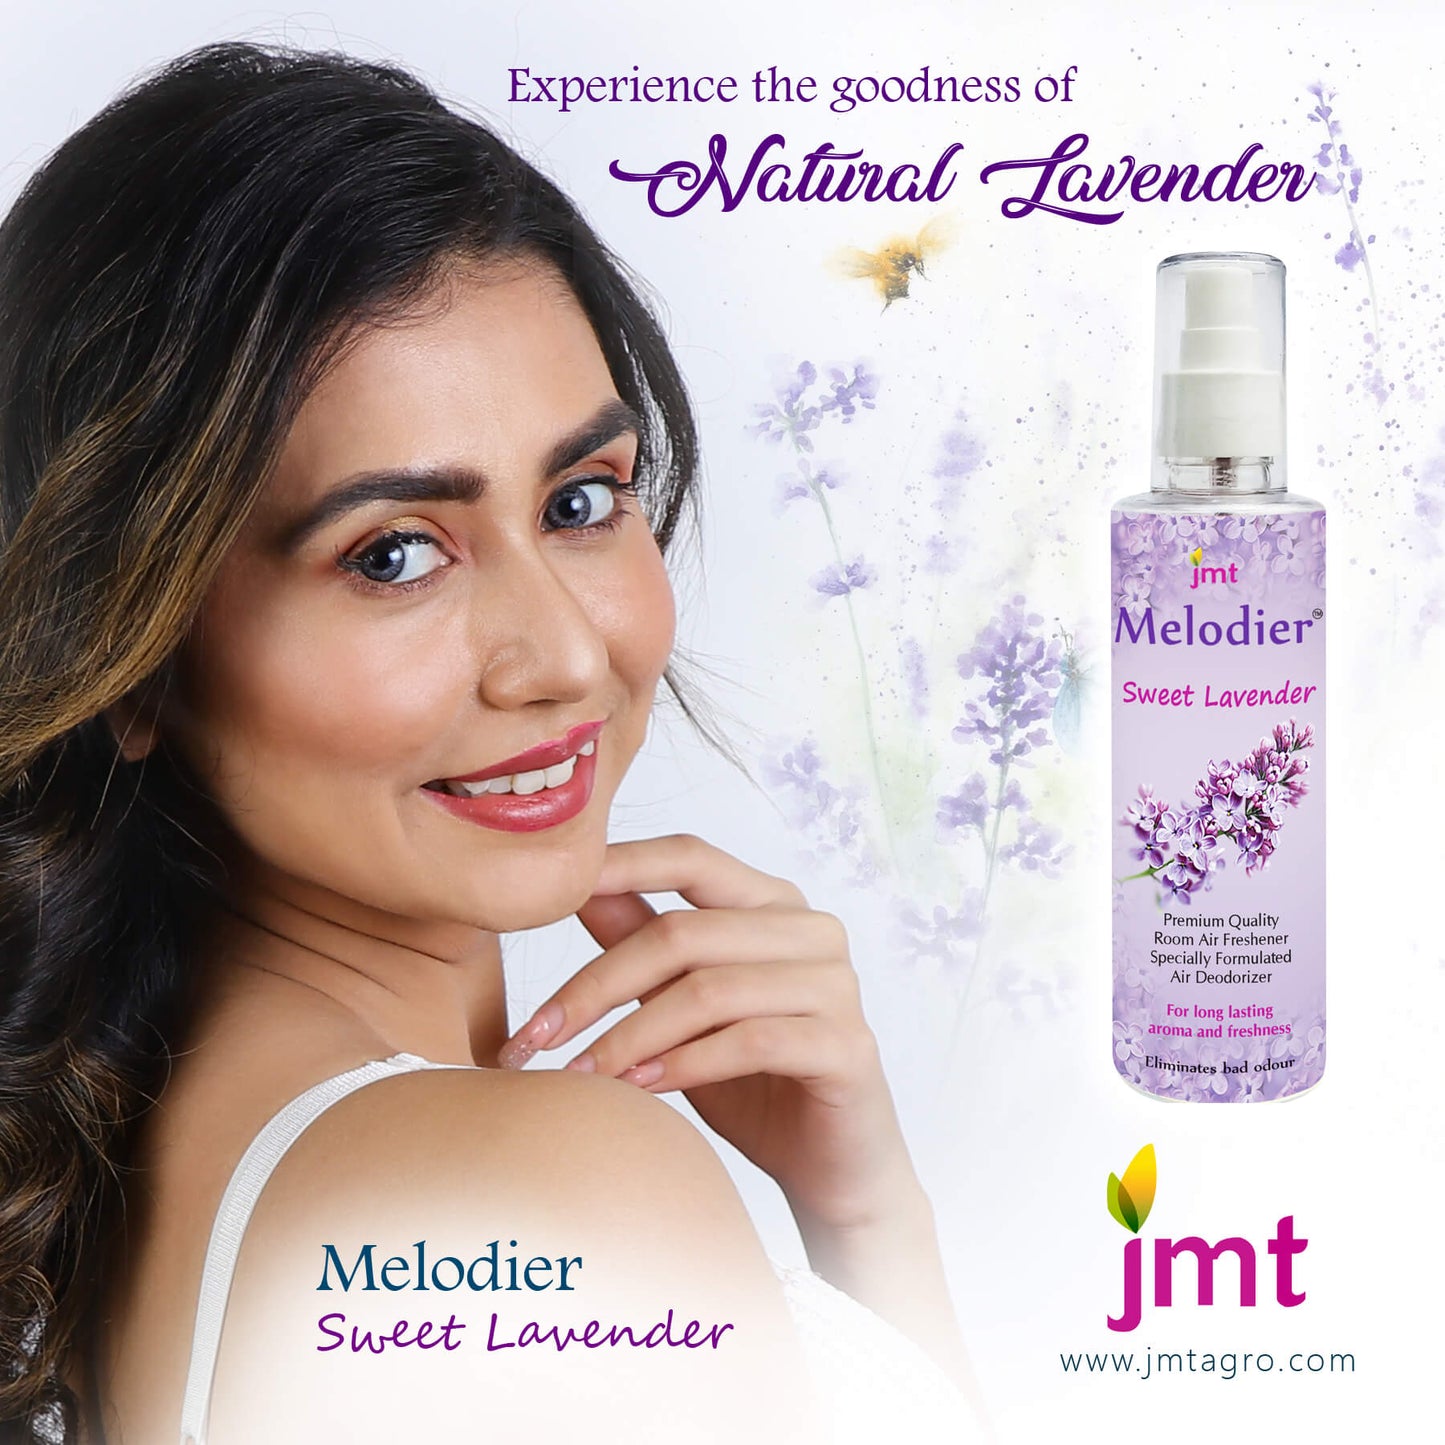 Melodier Sweet Lavender - Premium Quality Room Air Freshener with Air Deodorizer